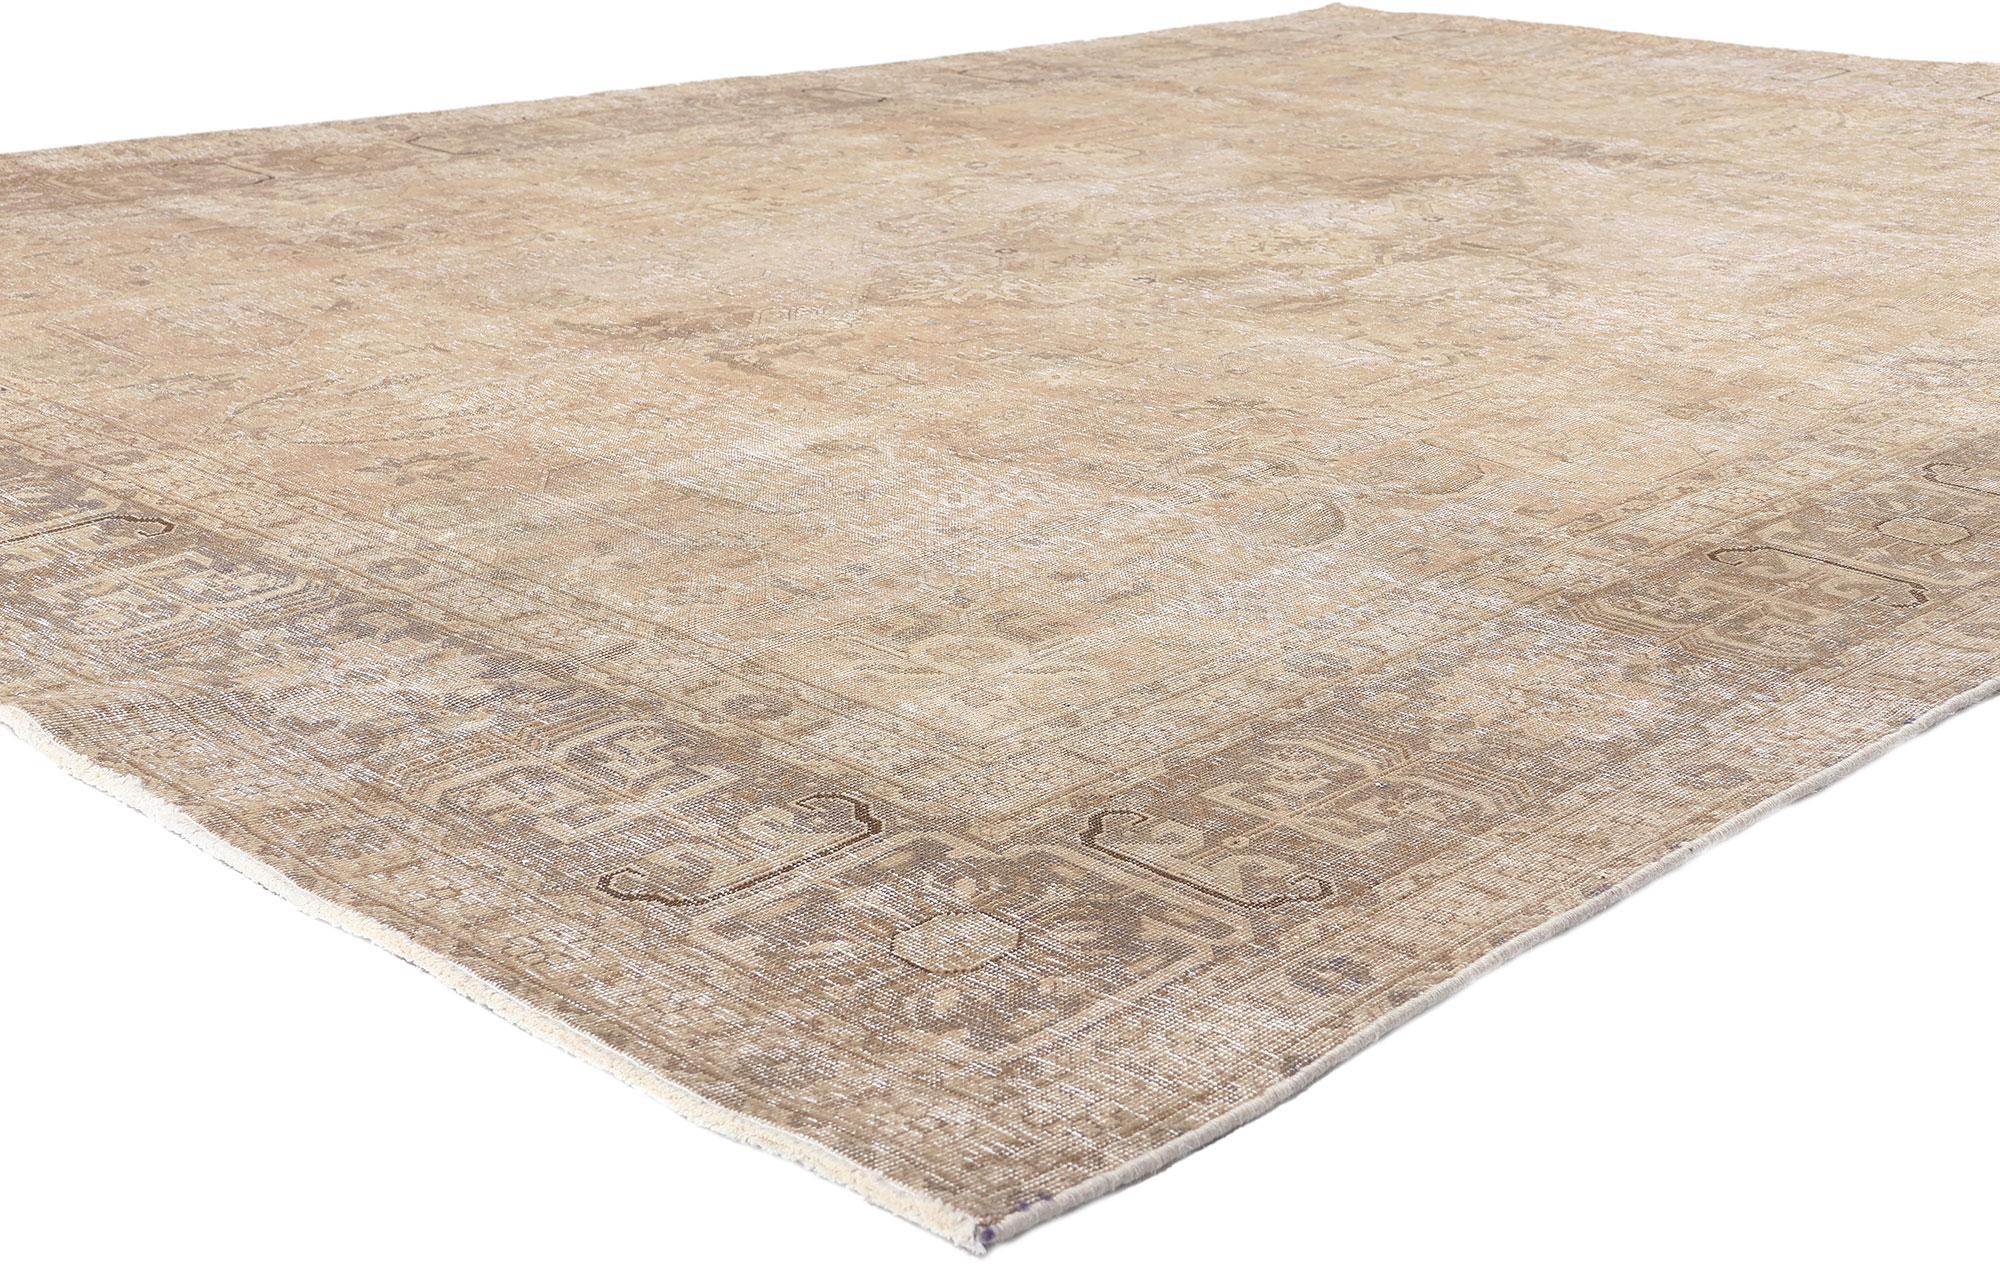 61261 Distressed Antique Persian Tabriz Rug, 08'01 x 11'02.
​Weathered finesse meets tonal elegance in this hand knotted wool distressed antique-worn Persian Tabriz rug.

Rendered in variegated shades of tan, taupe, sand, beige, mushroom, pashmina,